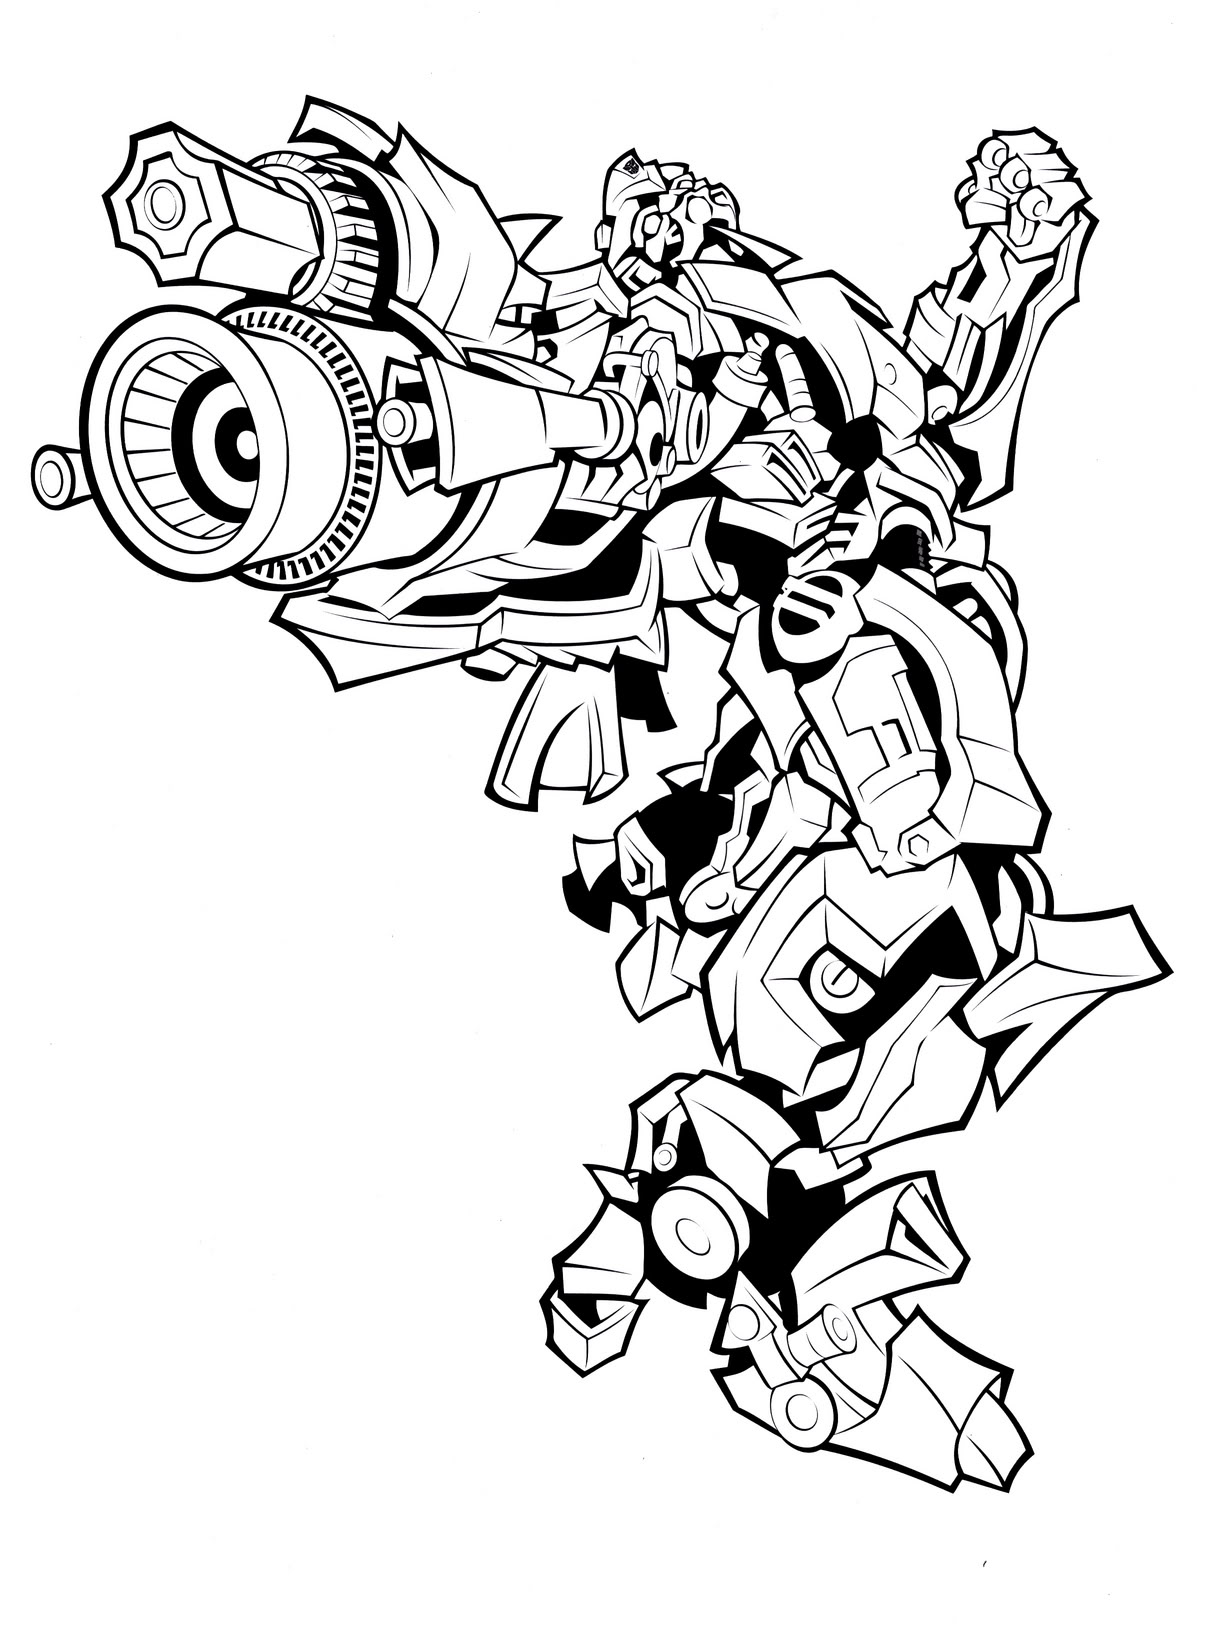 Bumblebee Transformer Coloring Pages PDF Free Coloringfolder